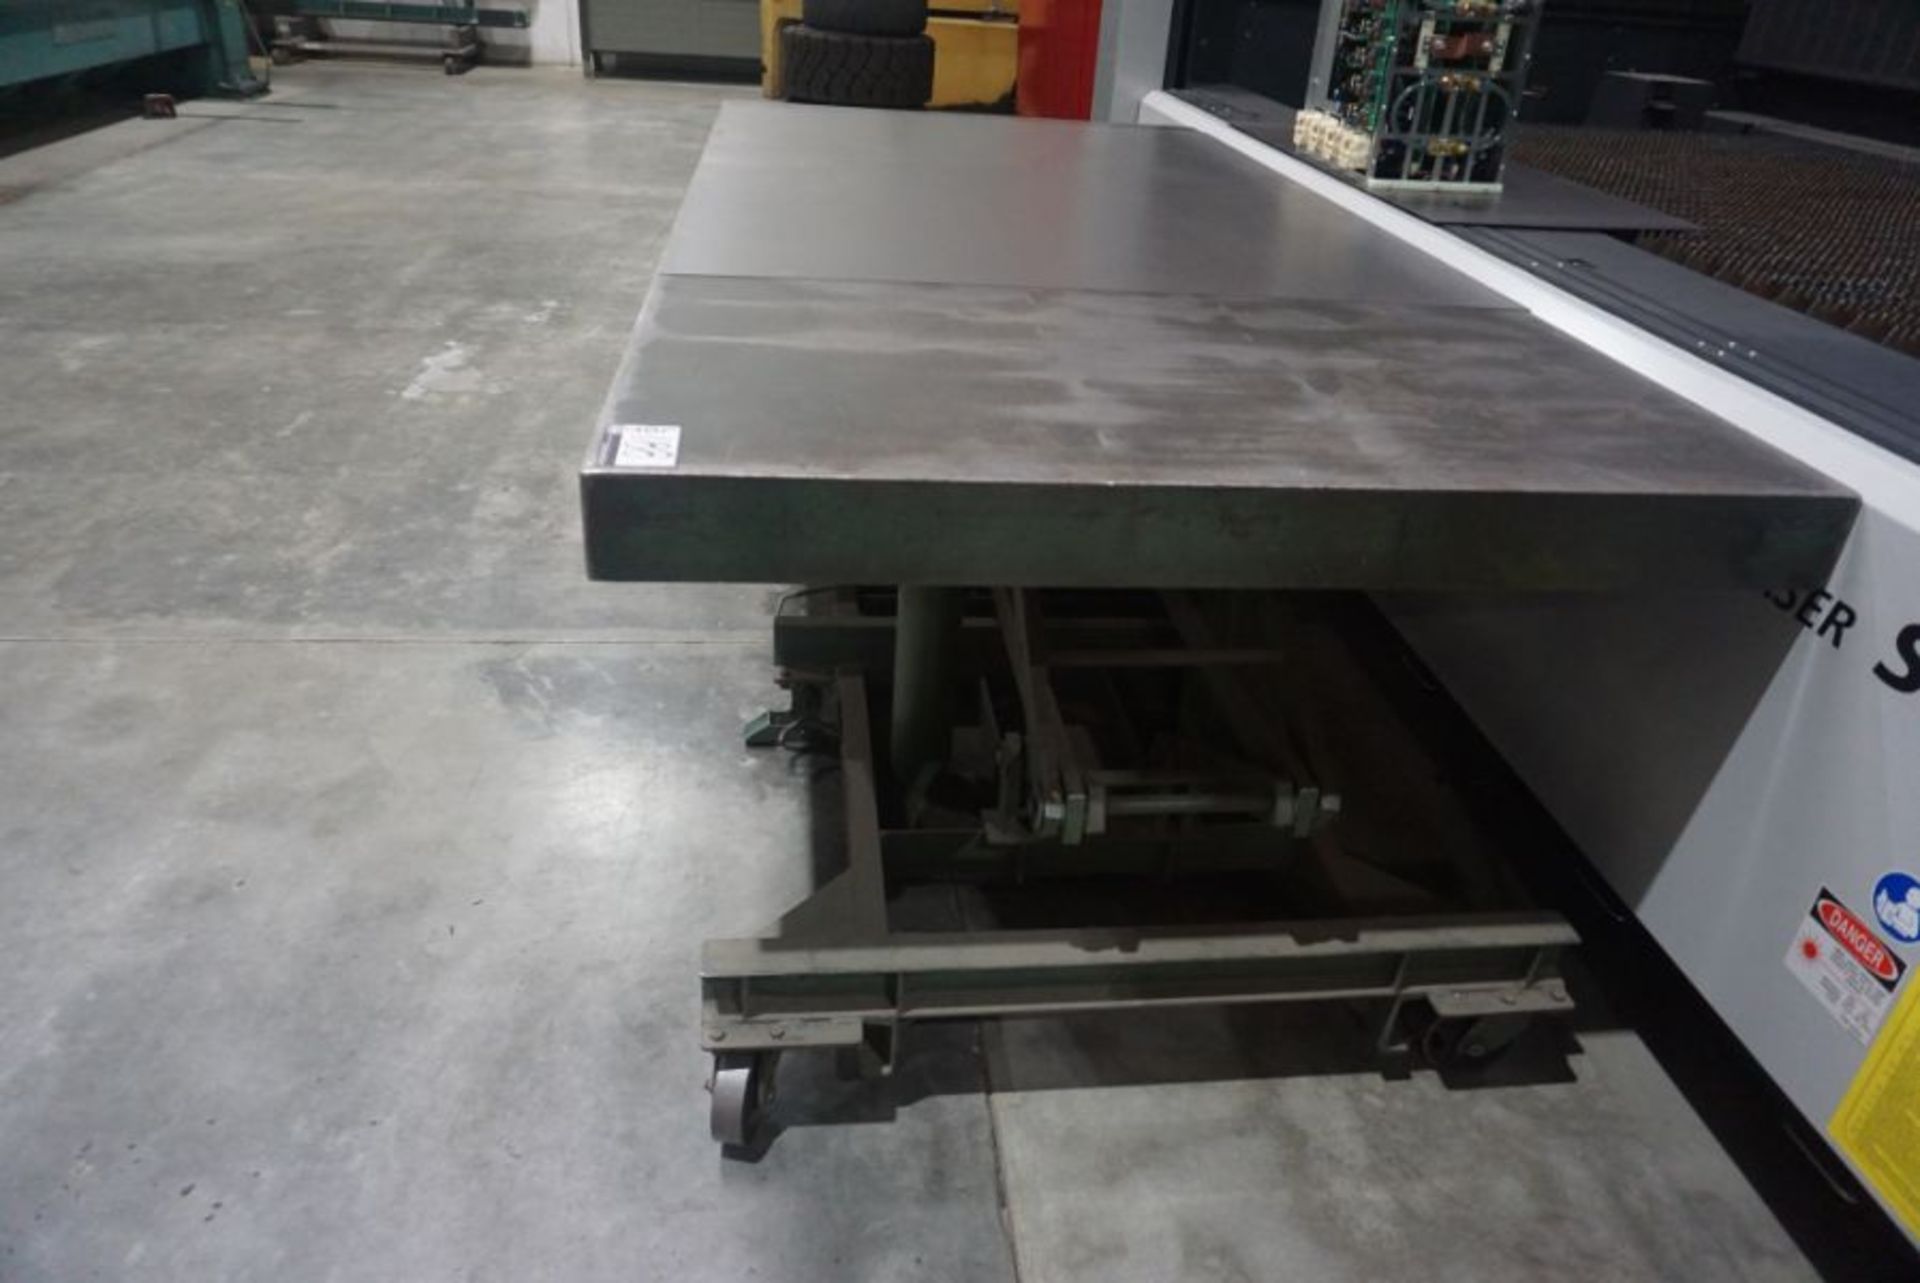 Lexco 48" x 96" Hydraulic Sheet Metal Table 2,000 Lbs. Cap. - Image 2 of 3